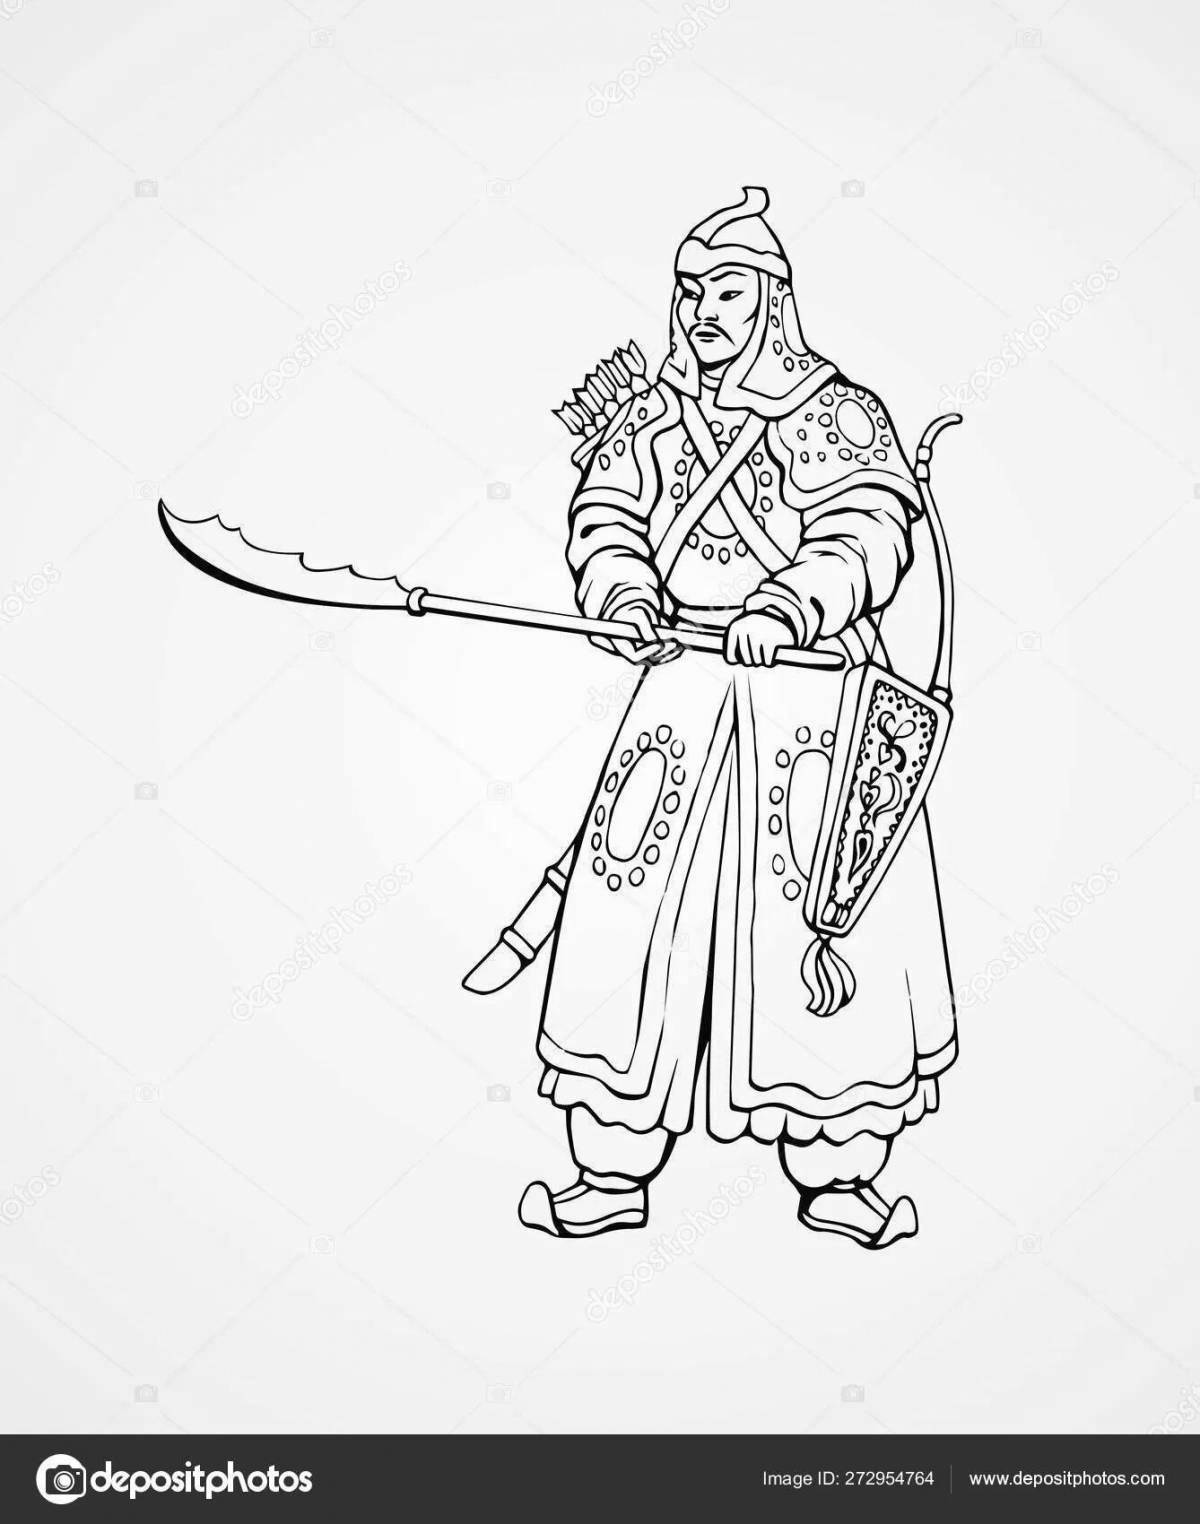 Exquisite Mongolian warrior coloring page